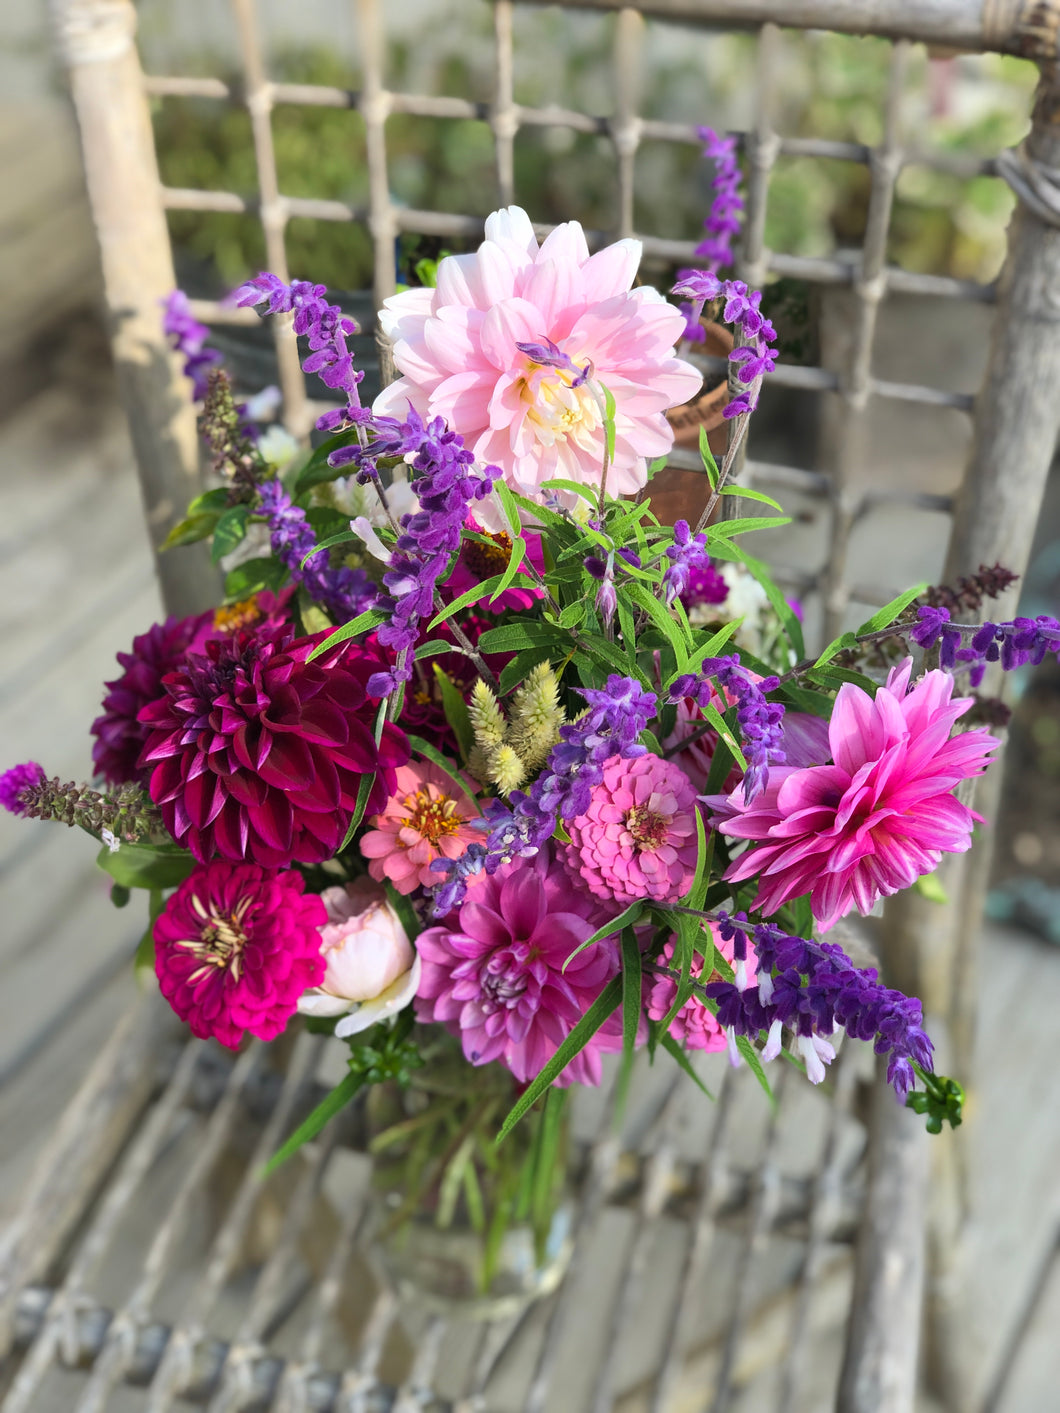 Monthly Flower Subscription - 3 months AUGUST - OCTOBER